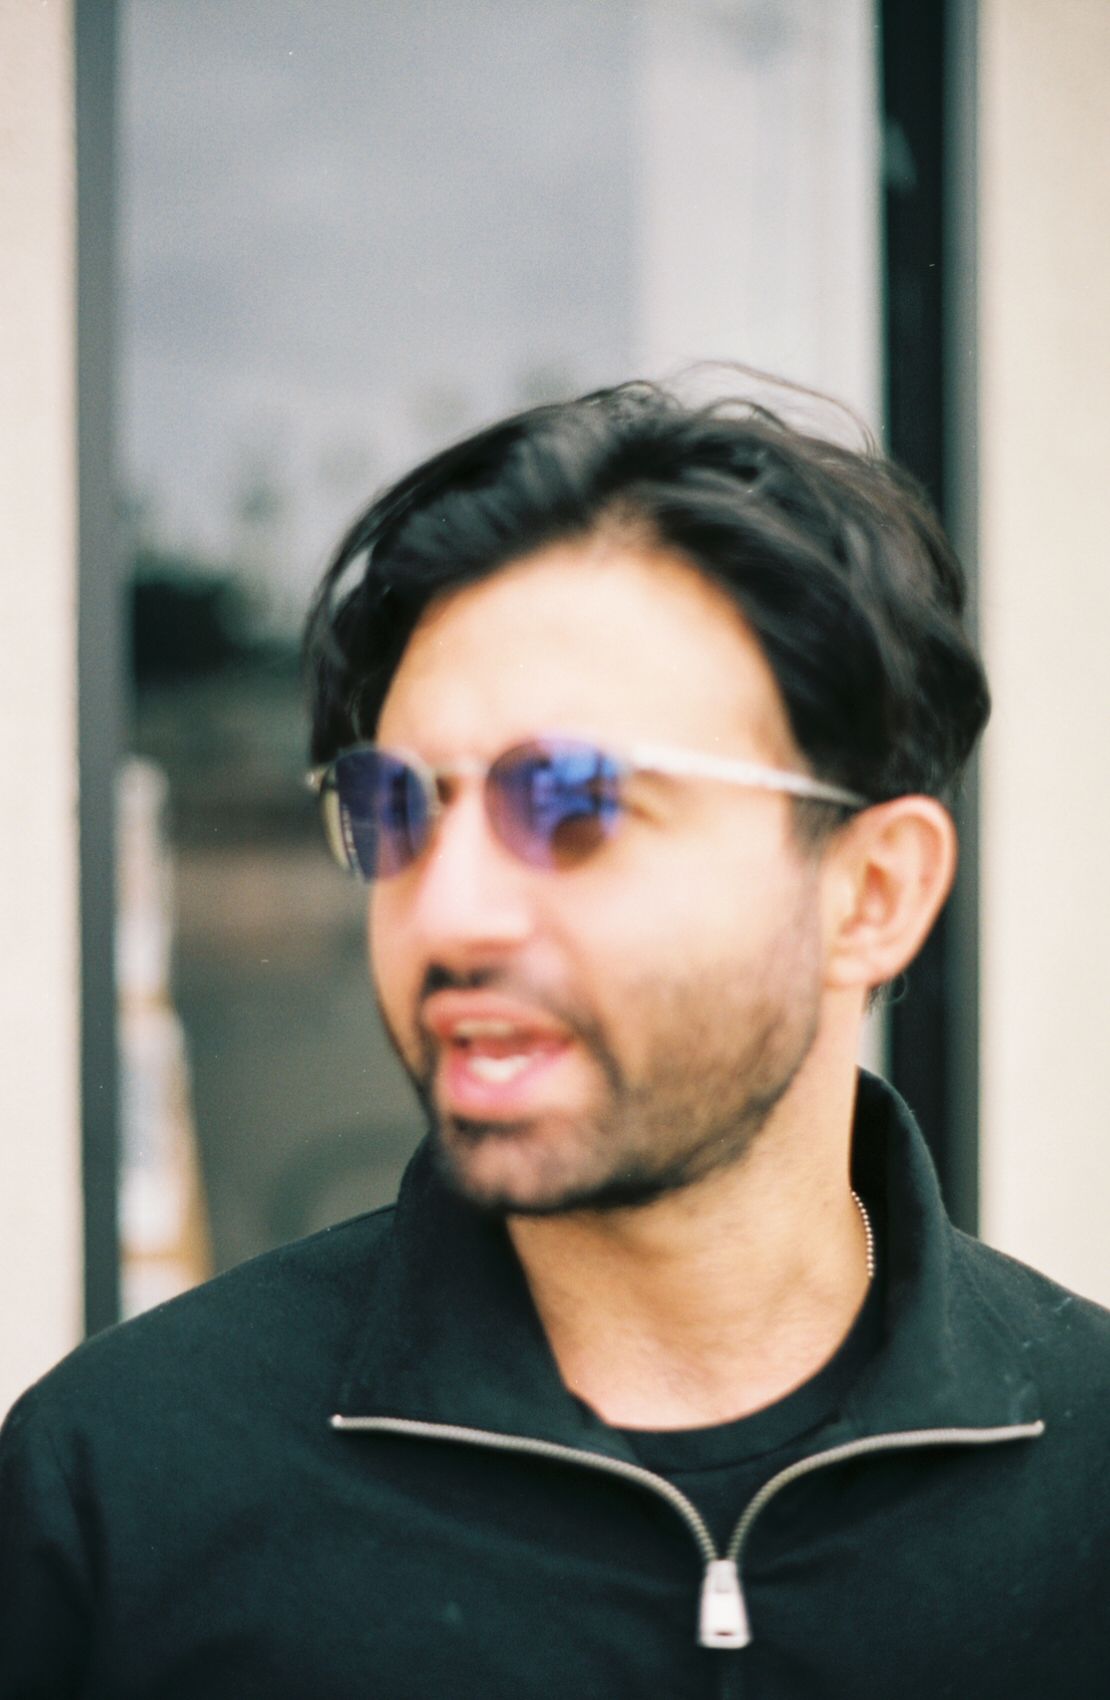 An out-of-focus portrait of a young man. He has long black hair and a short beard, and is wearing purple sunglasses and a black sweater.